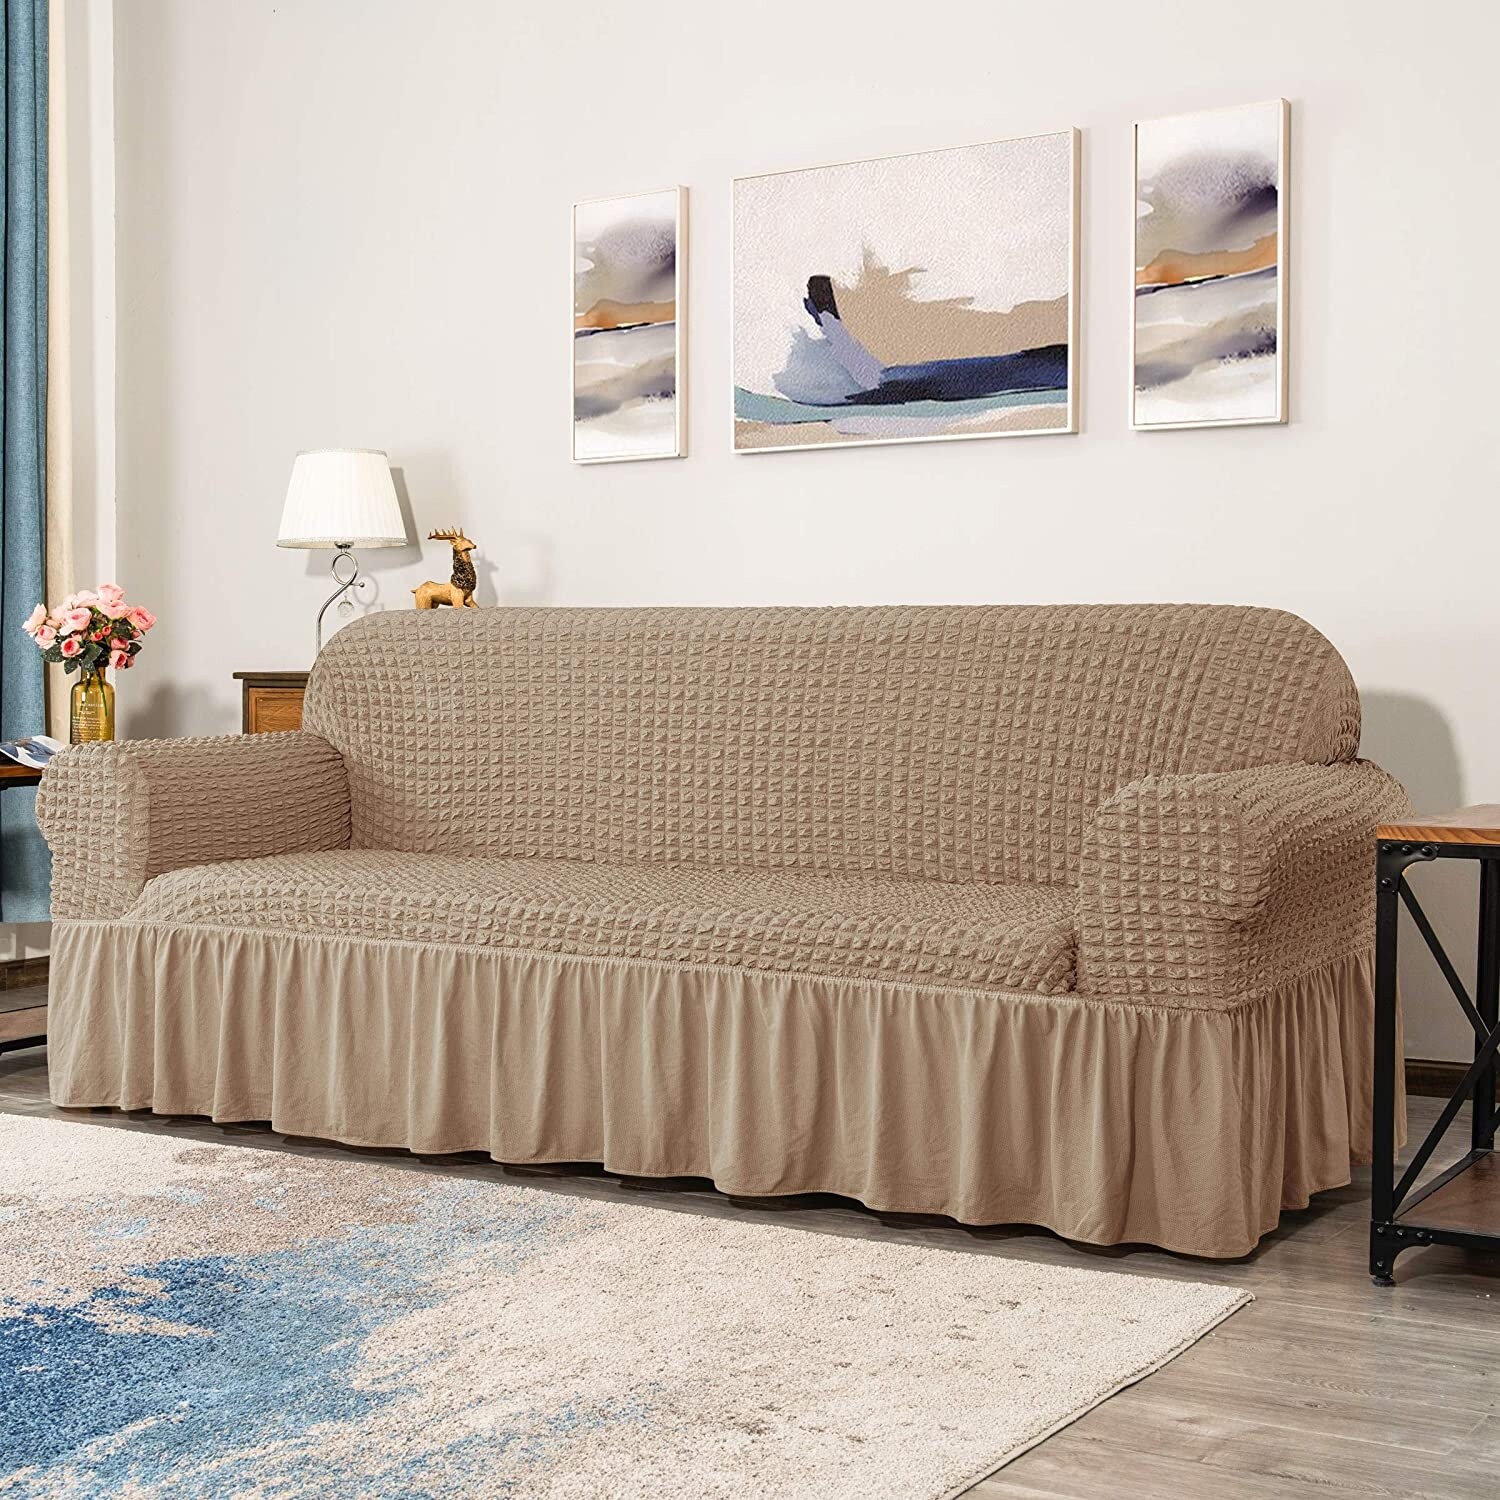 https://ak1.ostkcdn.com/images/products/is/images/direct/7ad4412fb82d33c4779d74fd4e44cd872fa86330/CHUN-YI-Loveseat-Slipcover-with-Seersucker-Skirt-Fitted-Couch-Cover.jpg